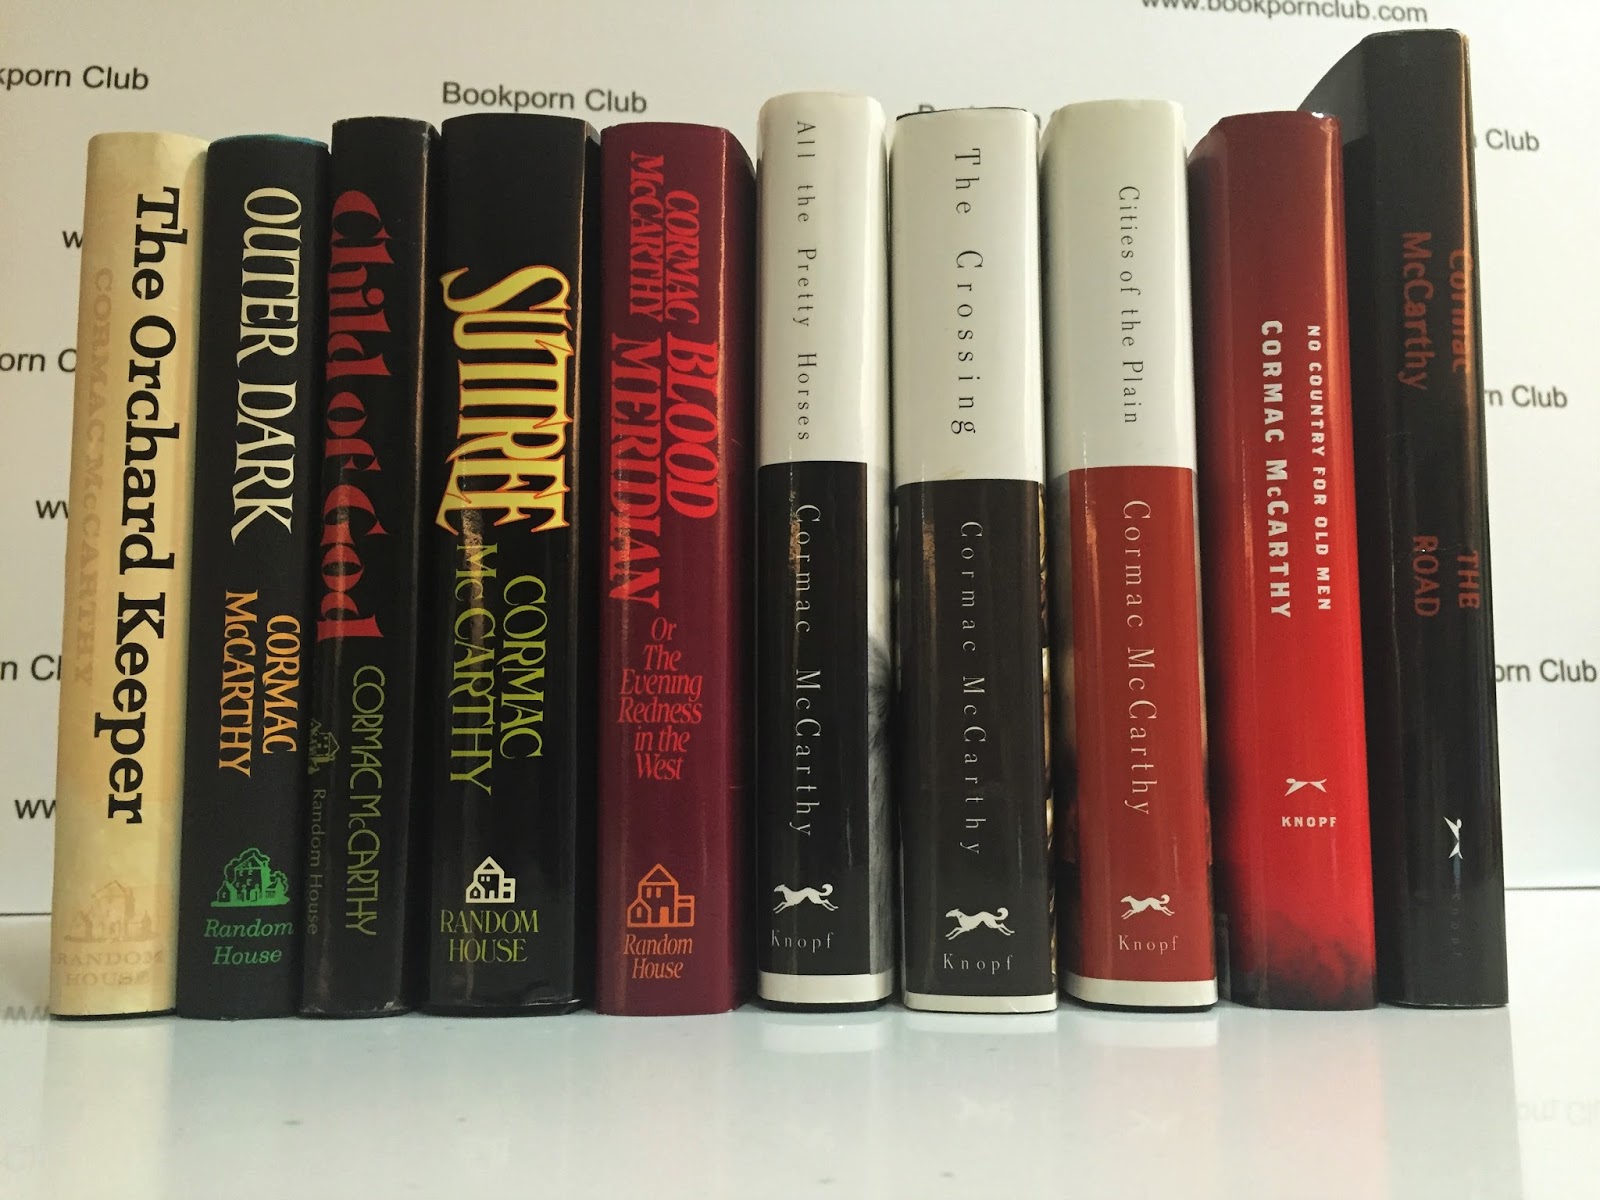 Where to start with: Cormac McCarthy, Books